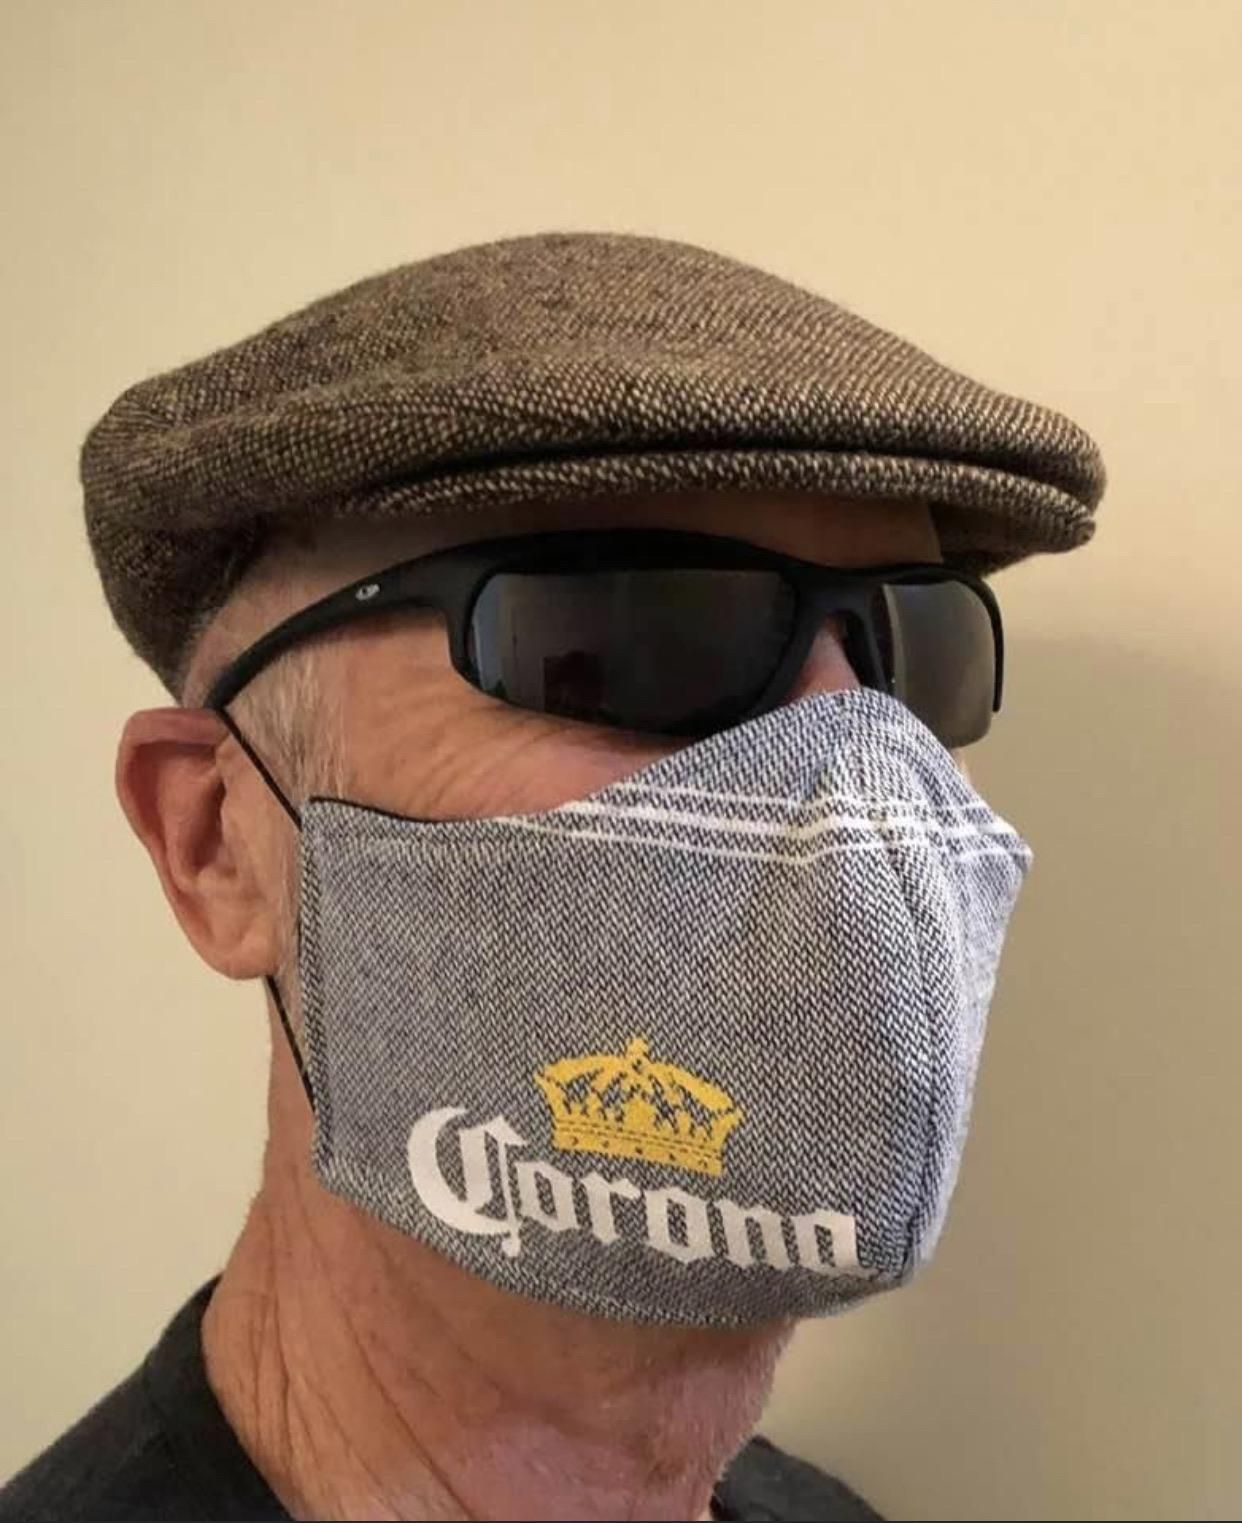 My Mom made my Dad a mask, she found the scarf a few years ago and had it in her sewing scrap bin. I’m thankful for their sense of humour, my parents are great.